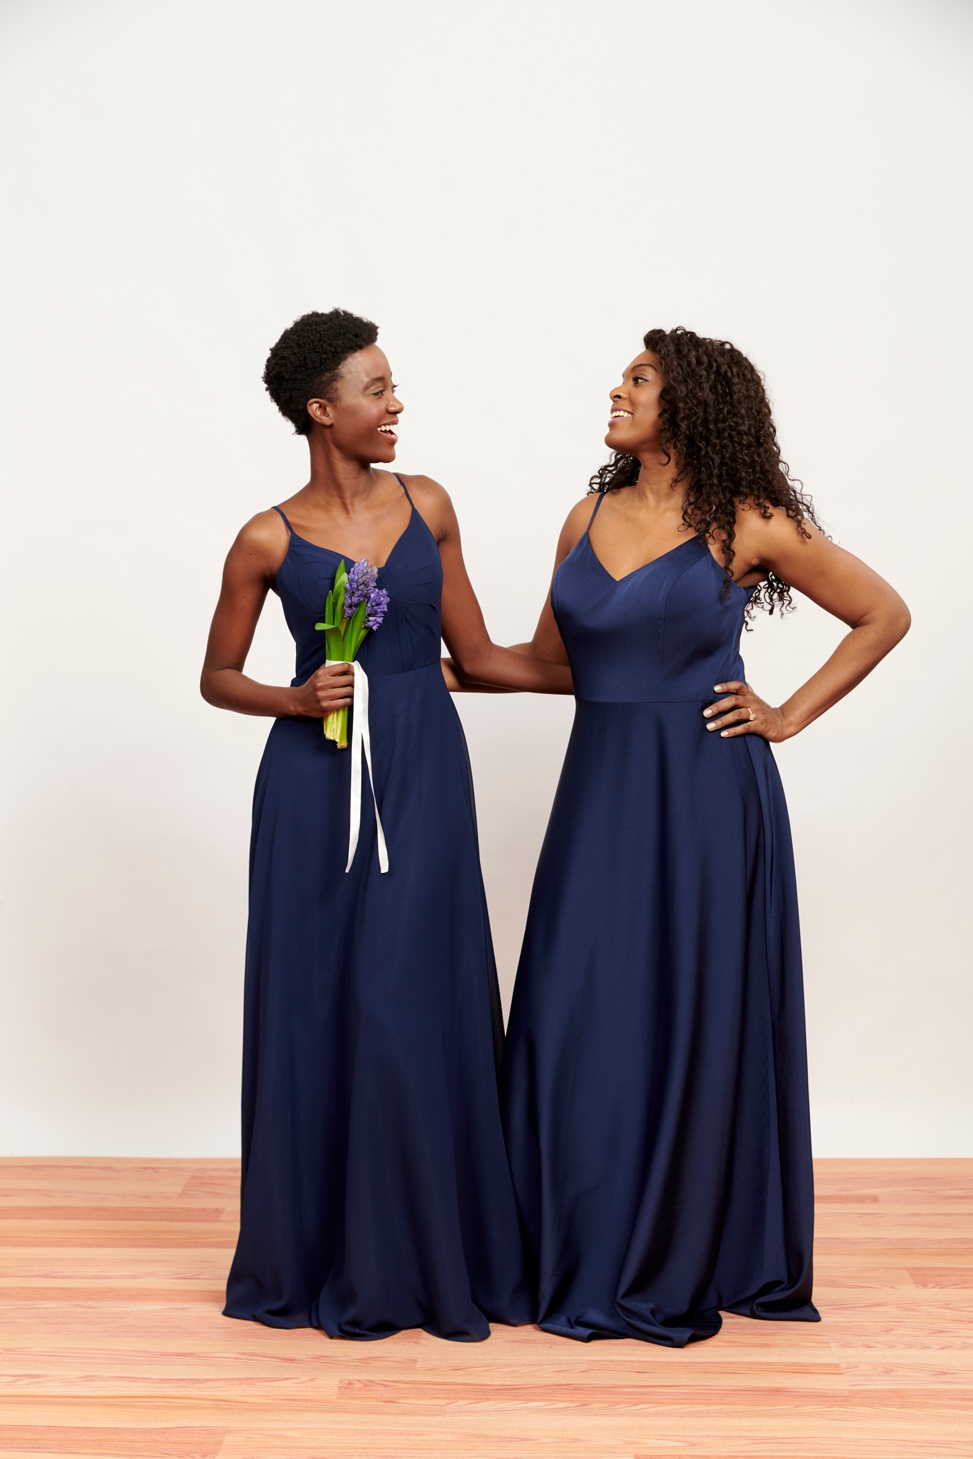 Two women stand in their new Brideside Aura bridesmaid dresses